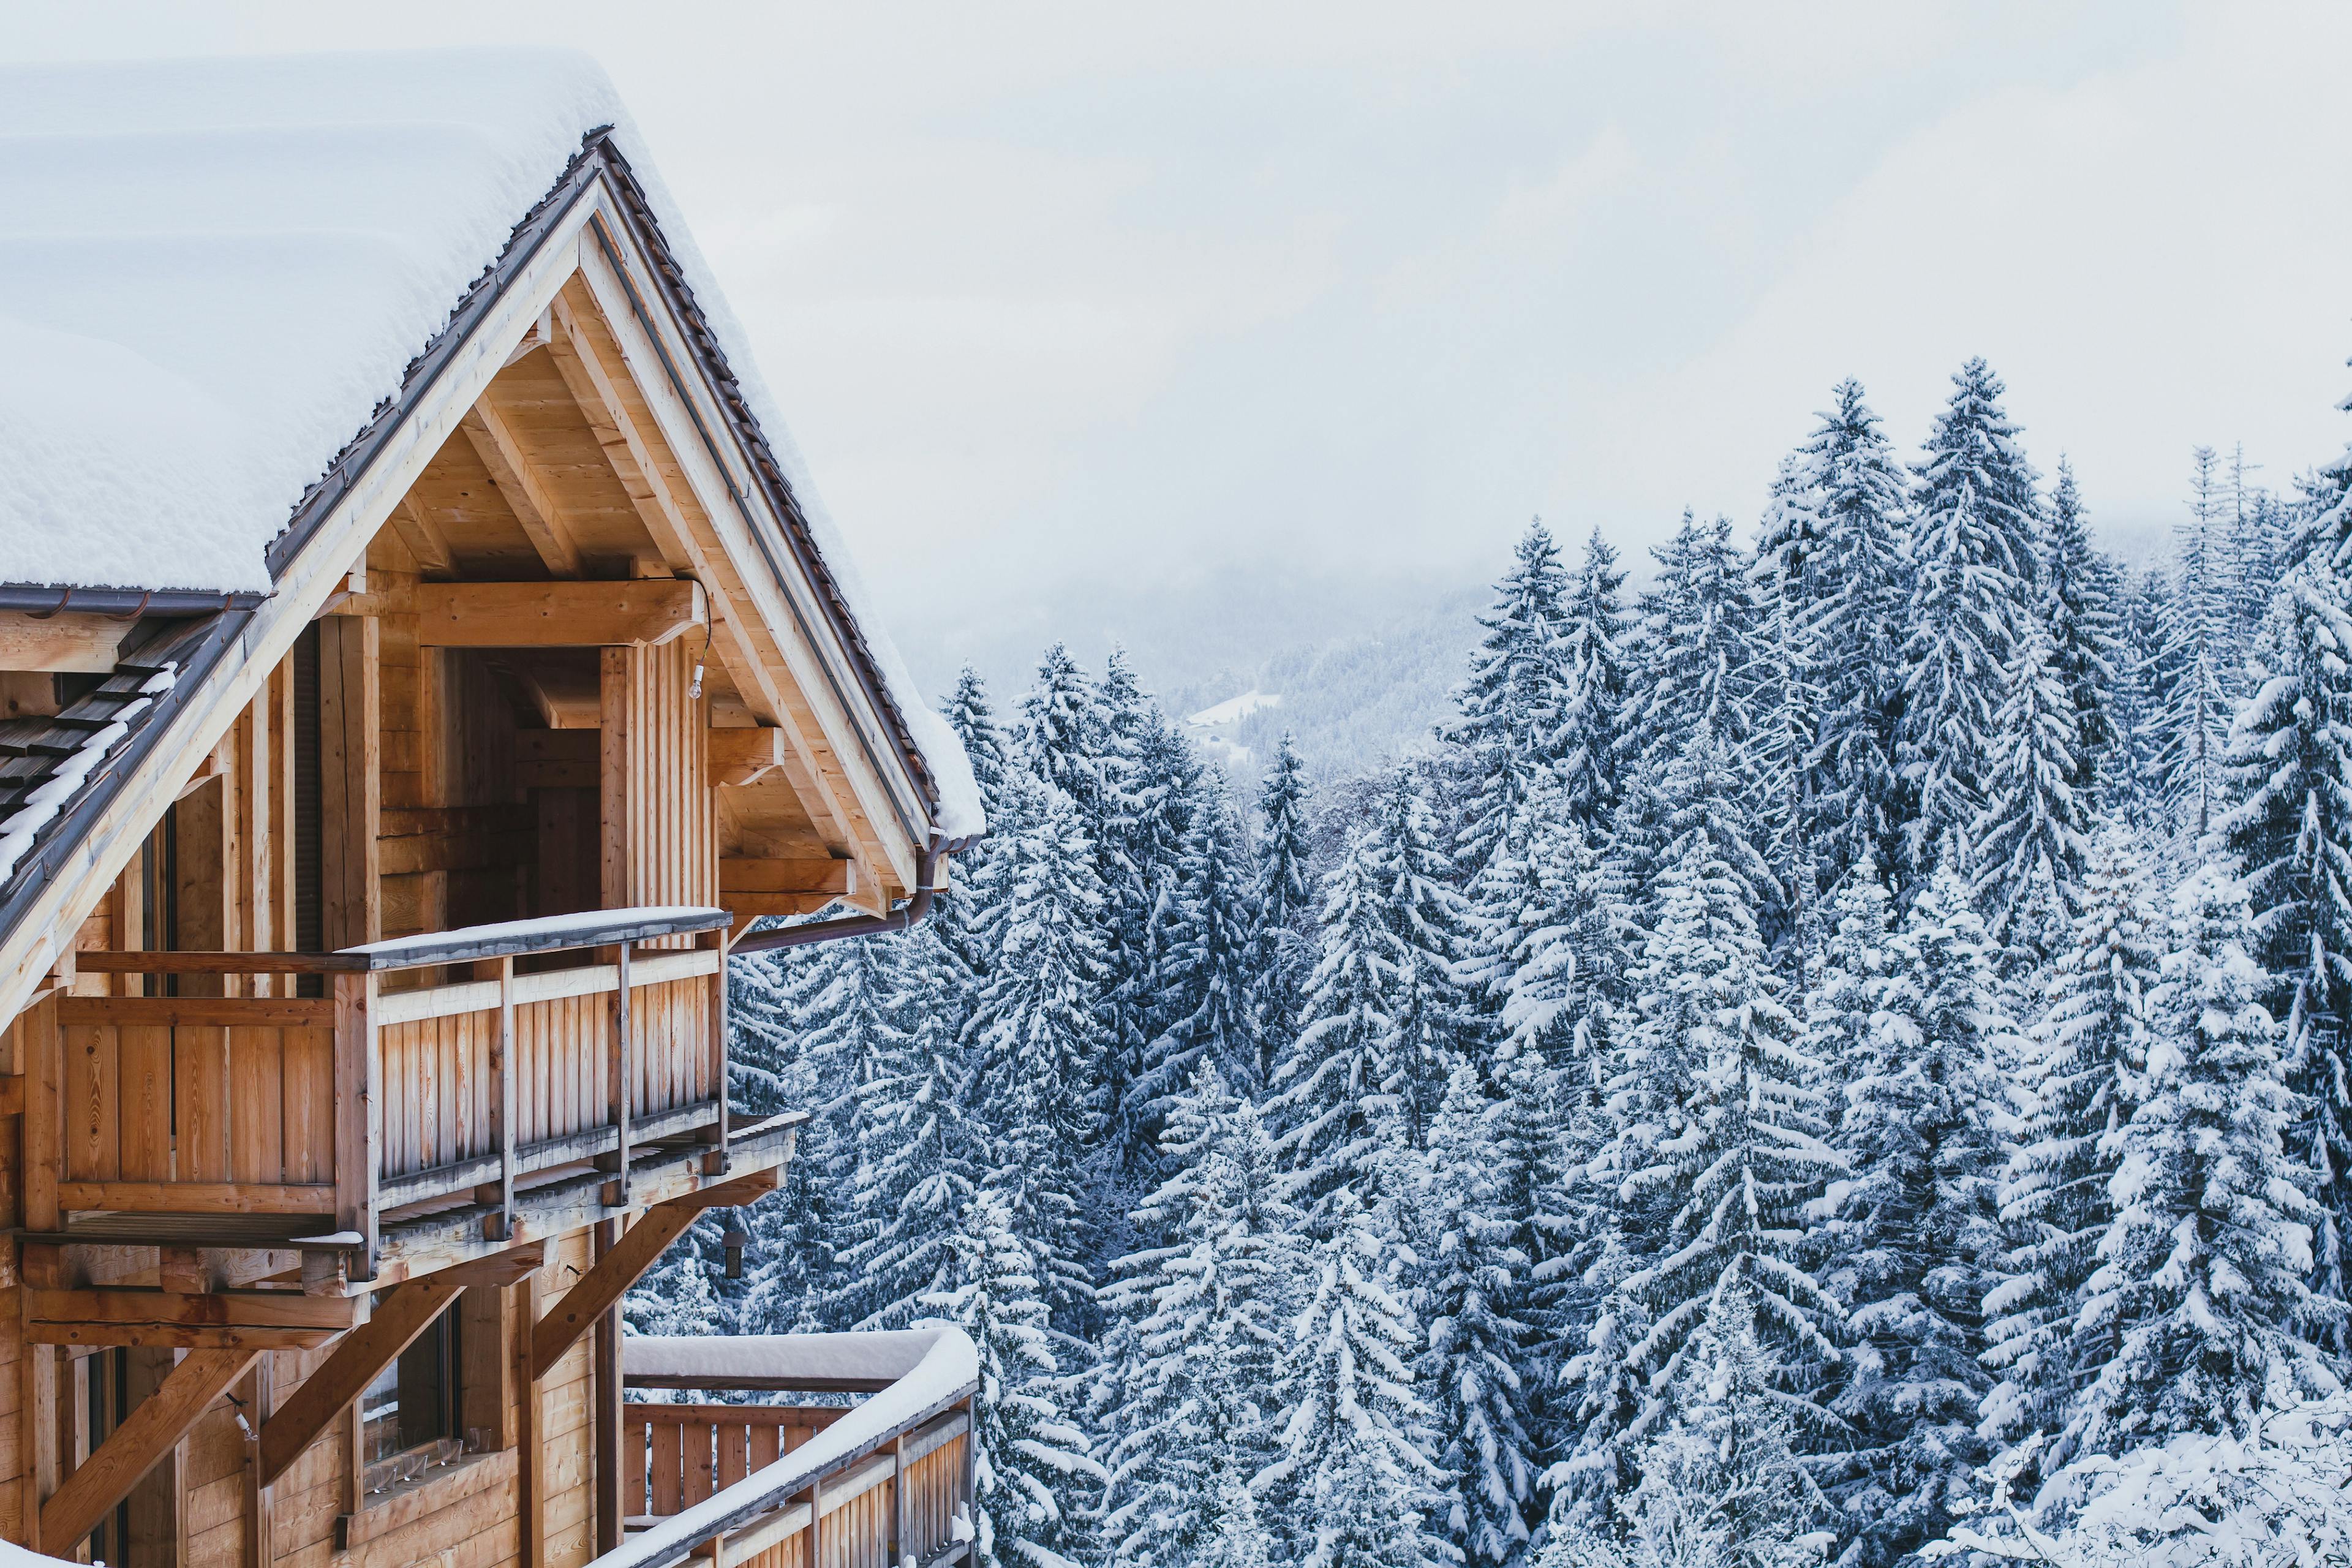 Wooden chalet amongst snowy trees